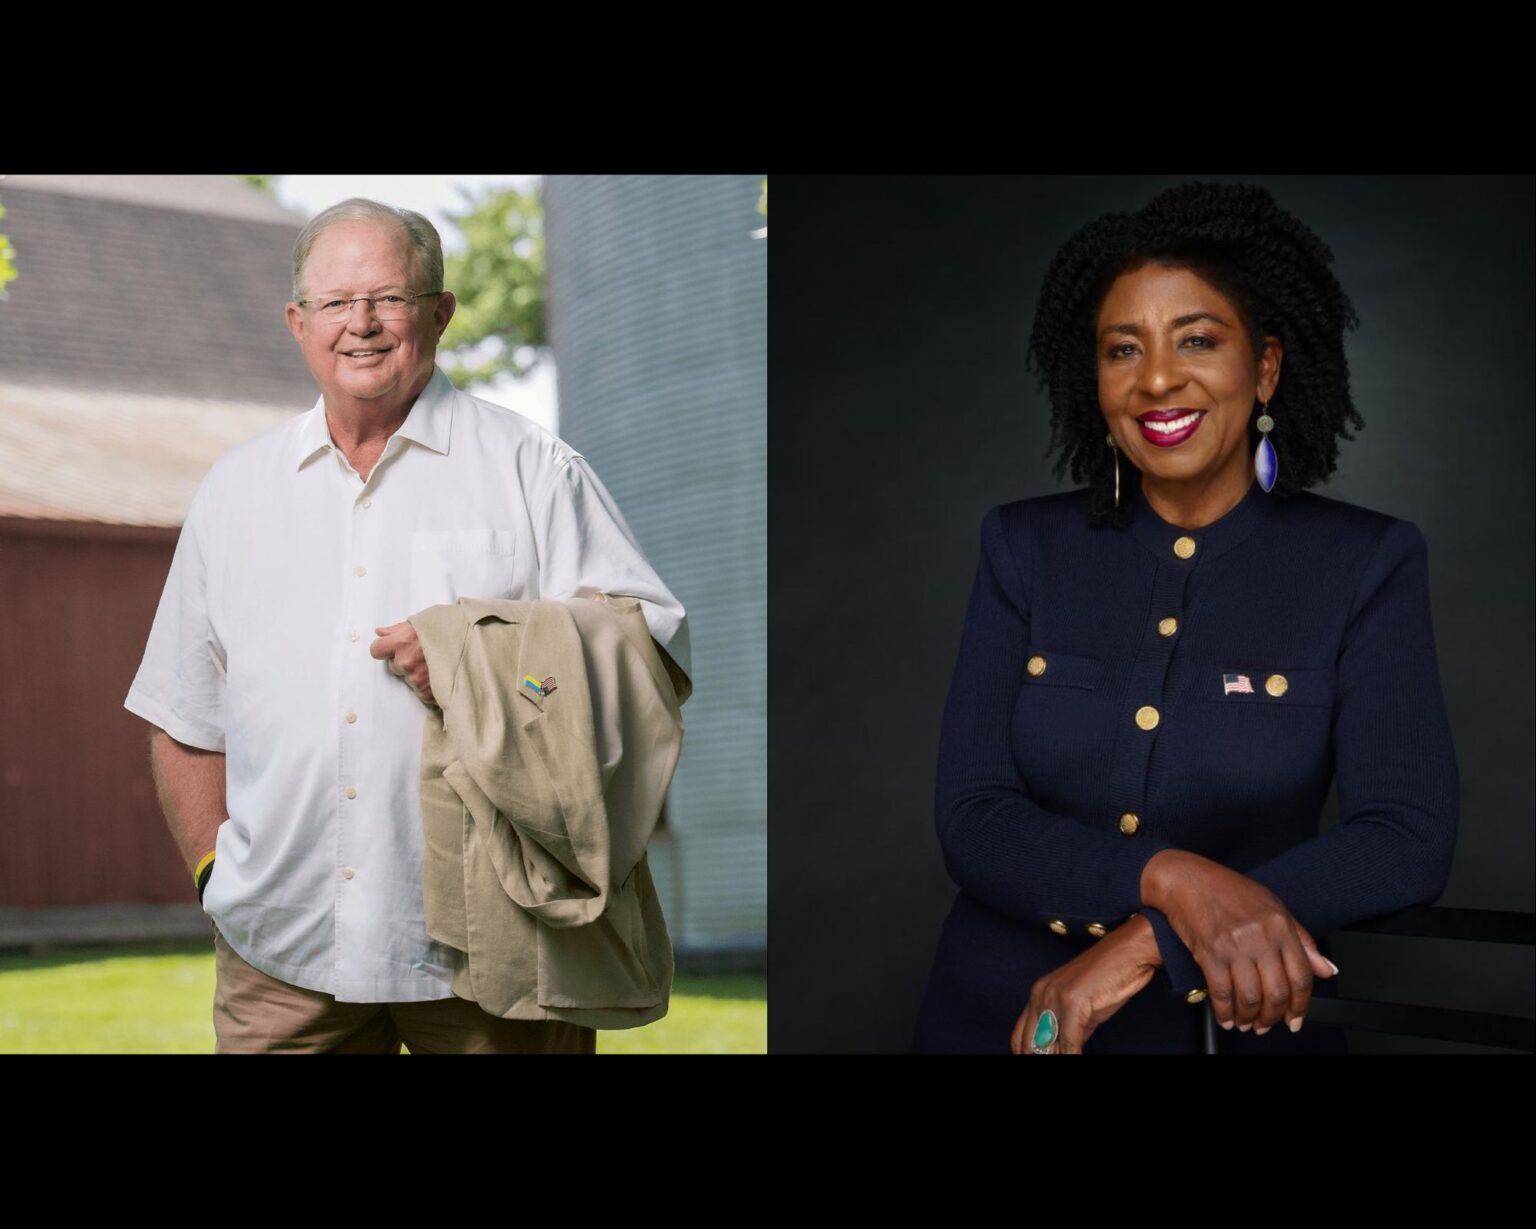 Democrats Marc Carmichael and Dr. Valarie McCray are on the primary ticket in the 2024 race for Indiana’s open U.S. Senate seat. (Photo illusrtation by Casey Smith/Indiana Capital Chronicle; Photos from campaign websites for Carmichael and McCray)